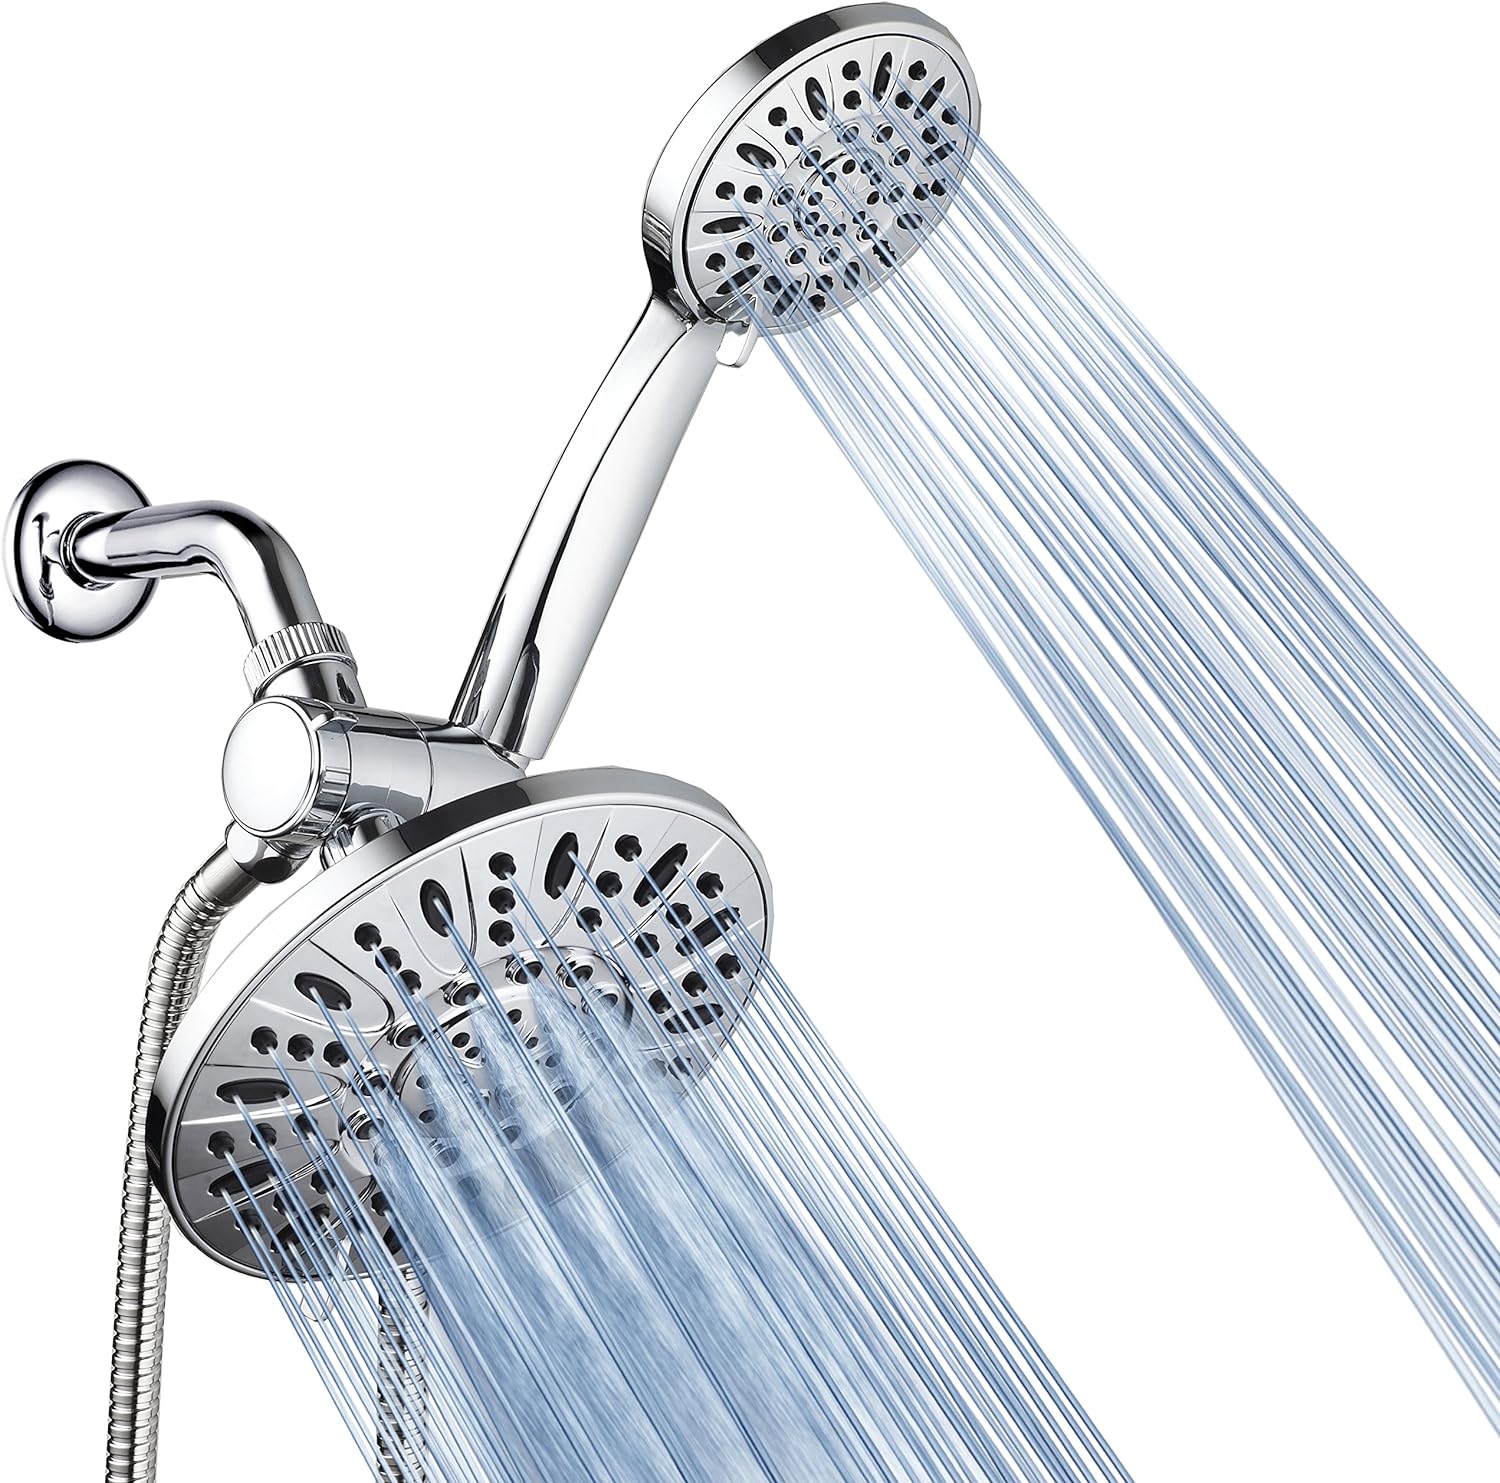 AquaDance 7 Premium High Pressure 3-Way Rainfall Combo for The Best of Both Worlds - Enjoy Luxurious Rain Showerhead and 6-Setting Hand Held Shower Separately or Together - Chrome Finish - 3328